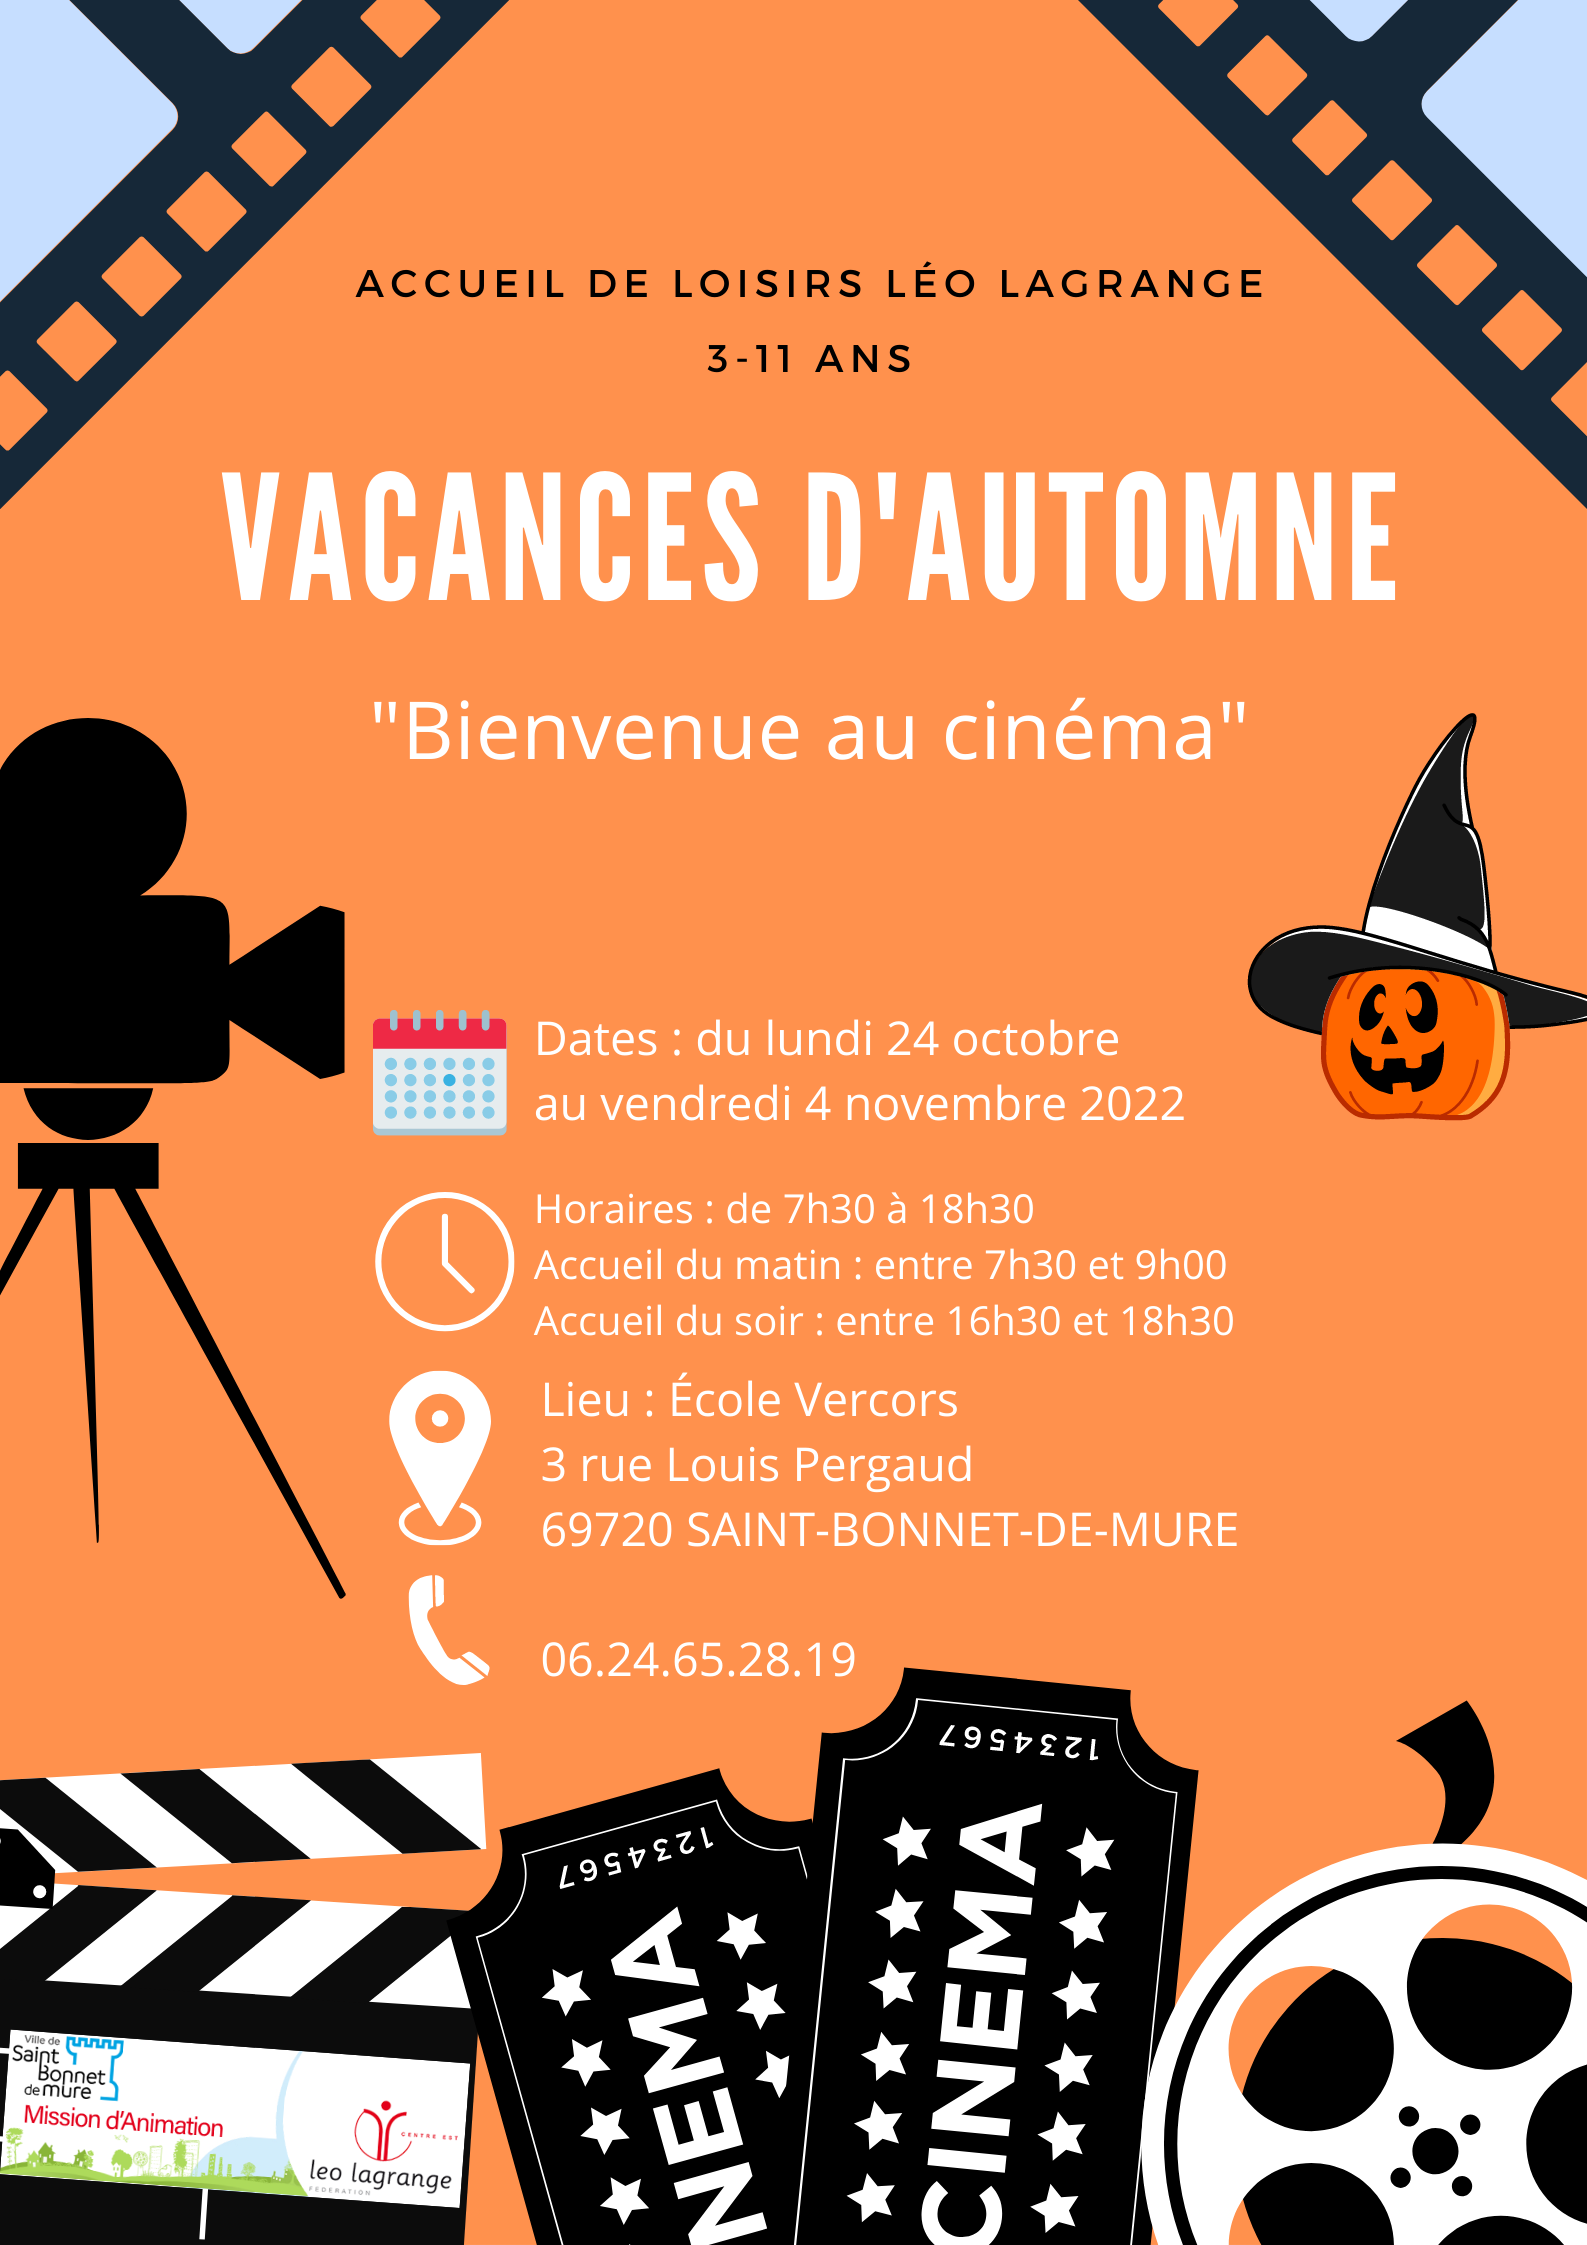 You are currently viewing Vacances d’Automne 2022